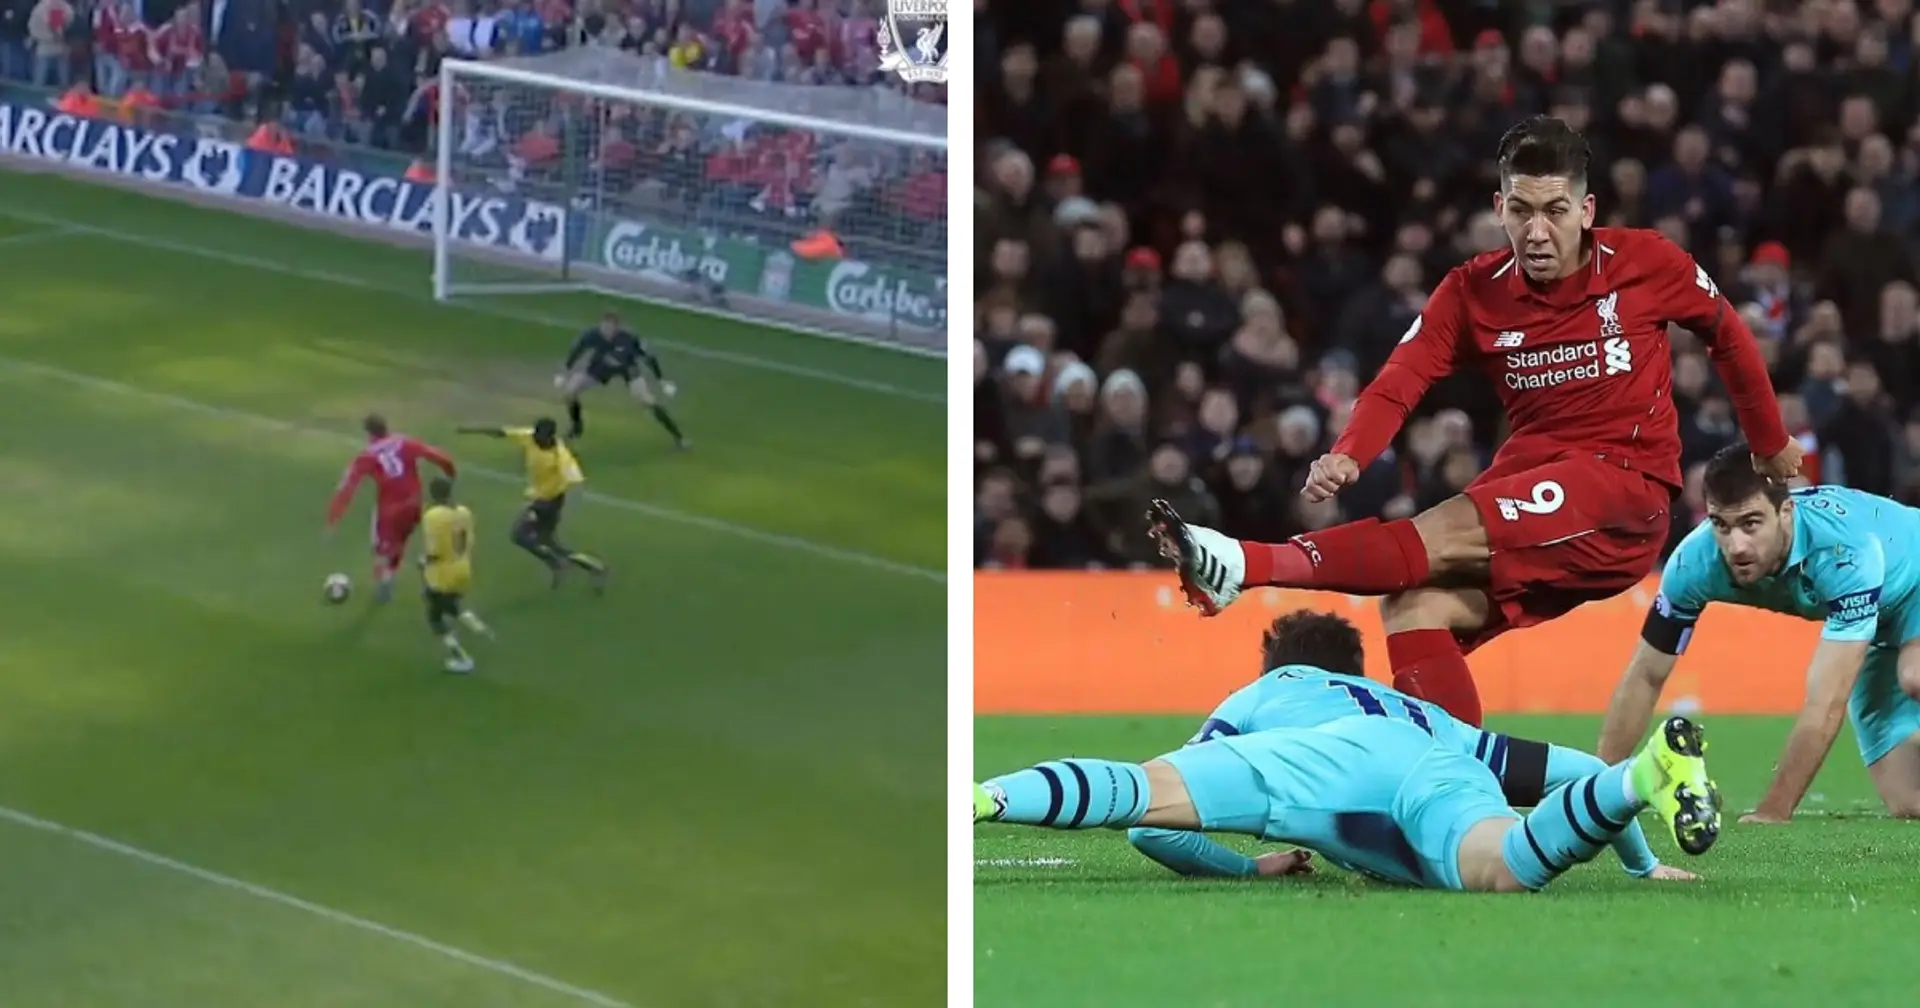 Relive Firmino sitting Arsenal down, Crouch's perfect hattrick and more brilliant Liverpool goals vs Gunners (video)